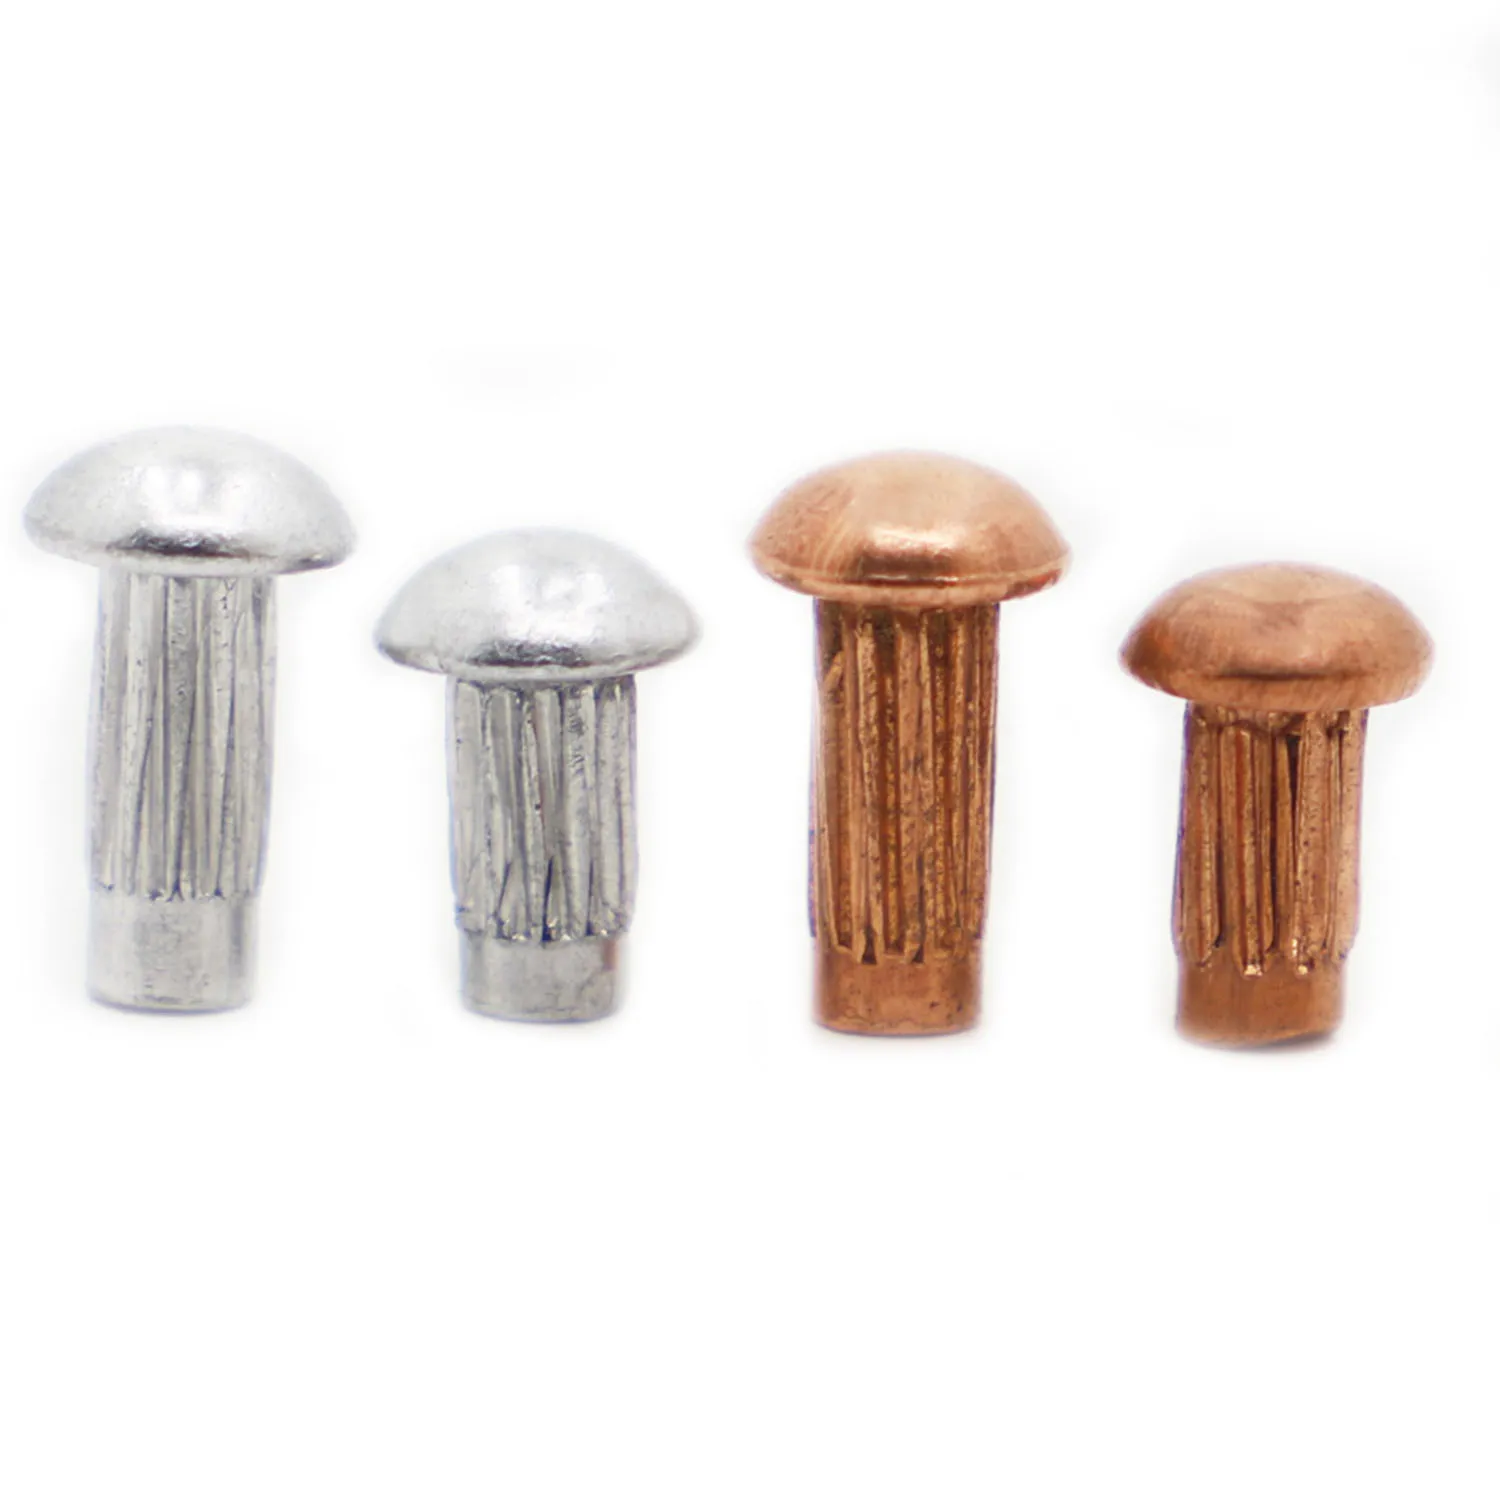 

10-100pcs M2 M2.5 M3 M4 Brass Knurled Solid Rivets Aluminum Round Head Knurled Shank Solid Rivet for Label Name Plate GB827